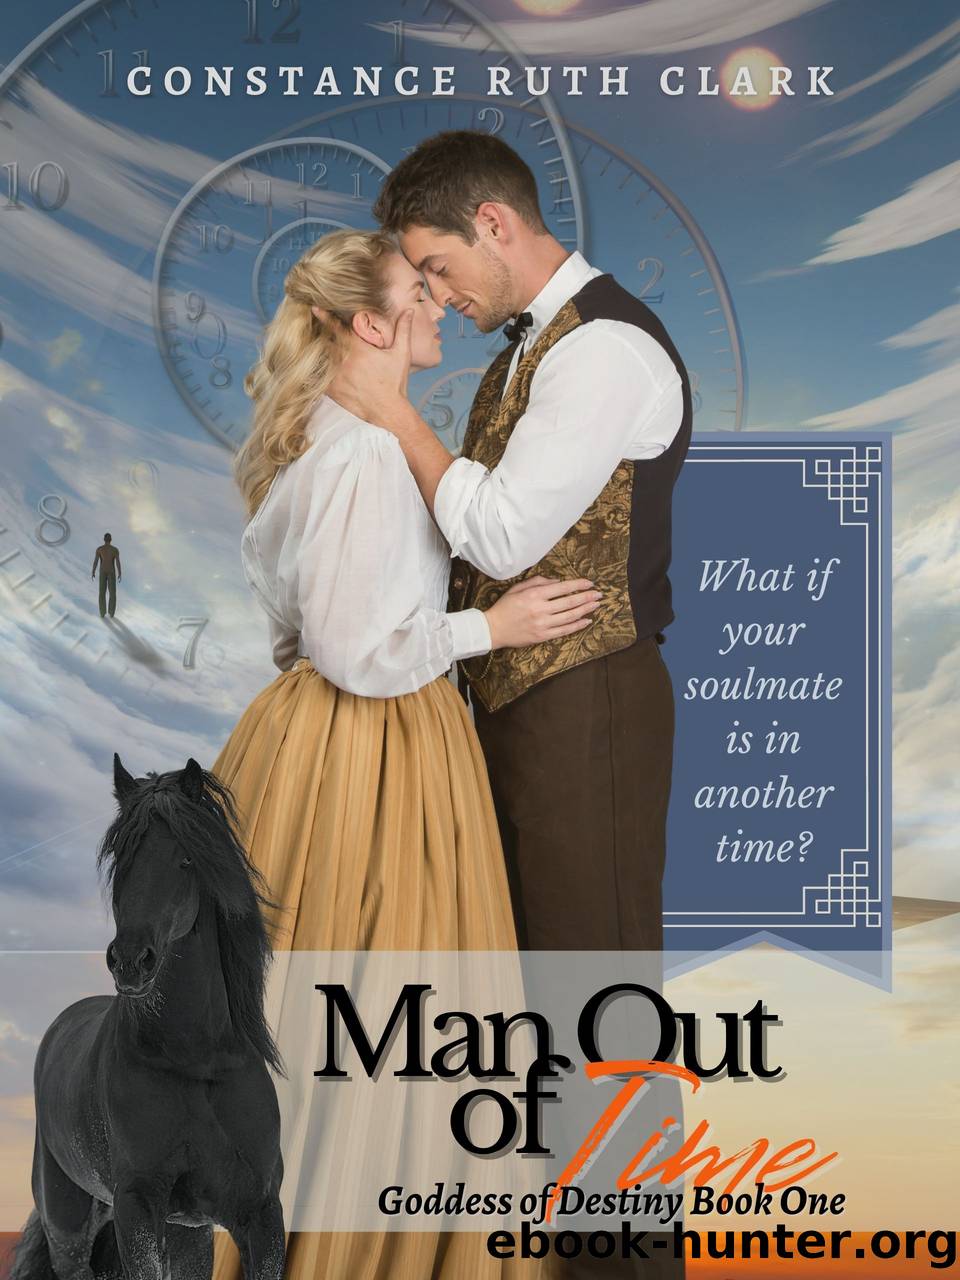 Man Out of Time by Constance Ruth Clark